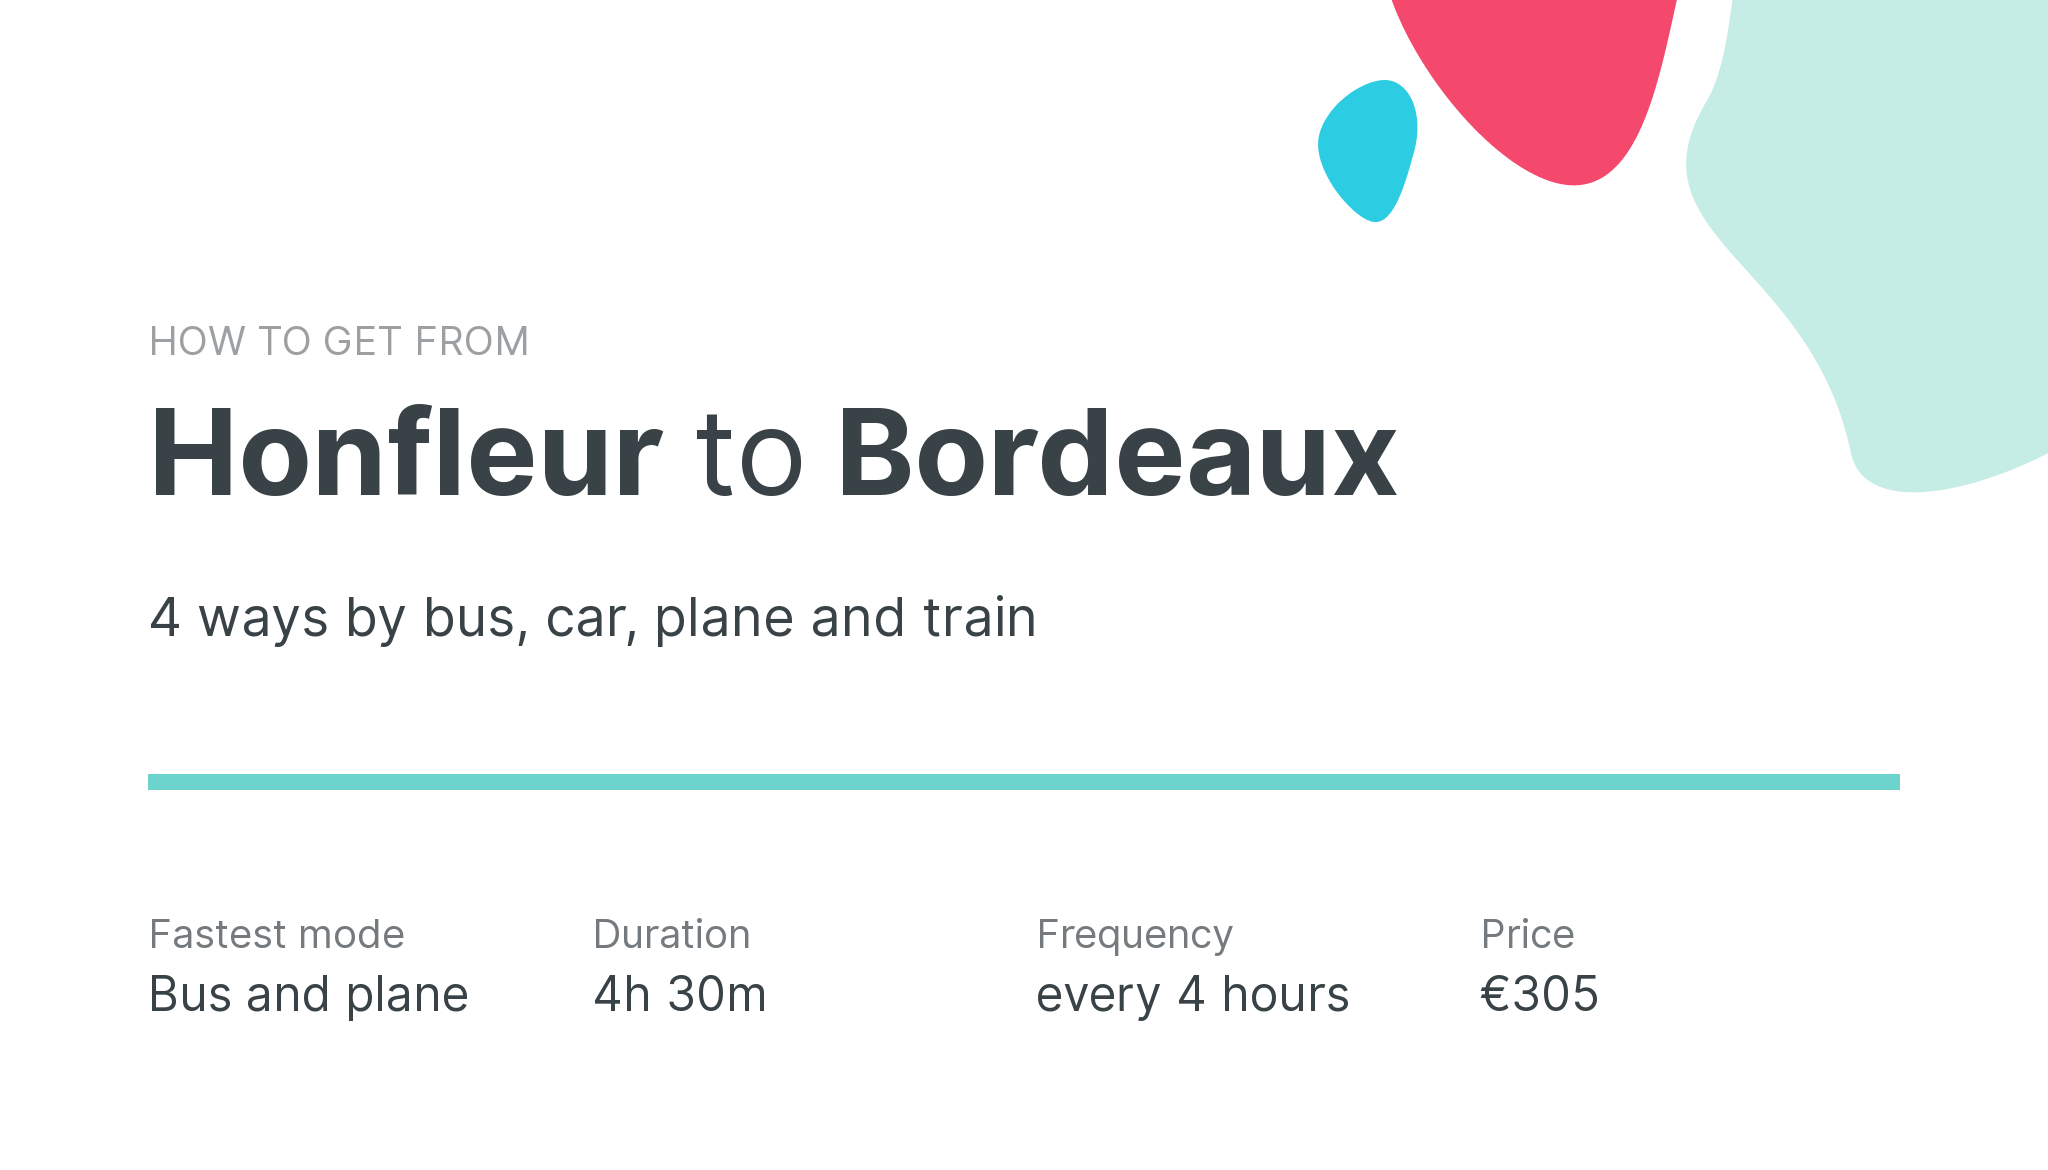 How do I get from Honfleur to Bordeaux